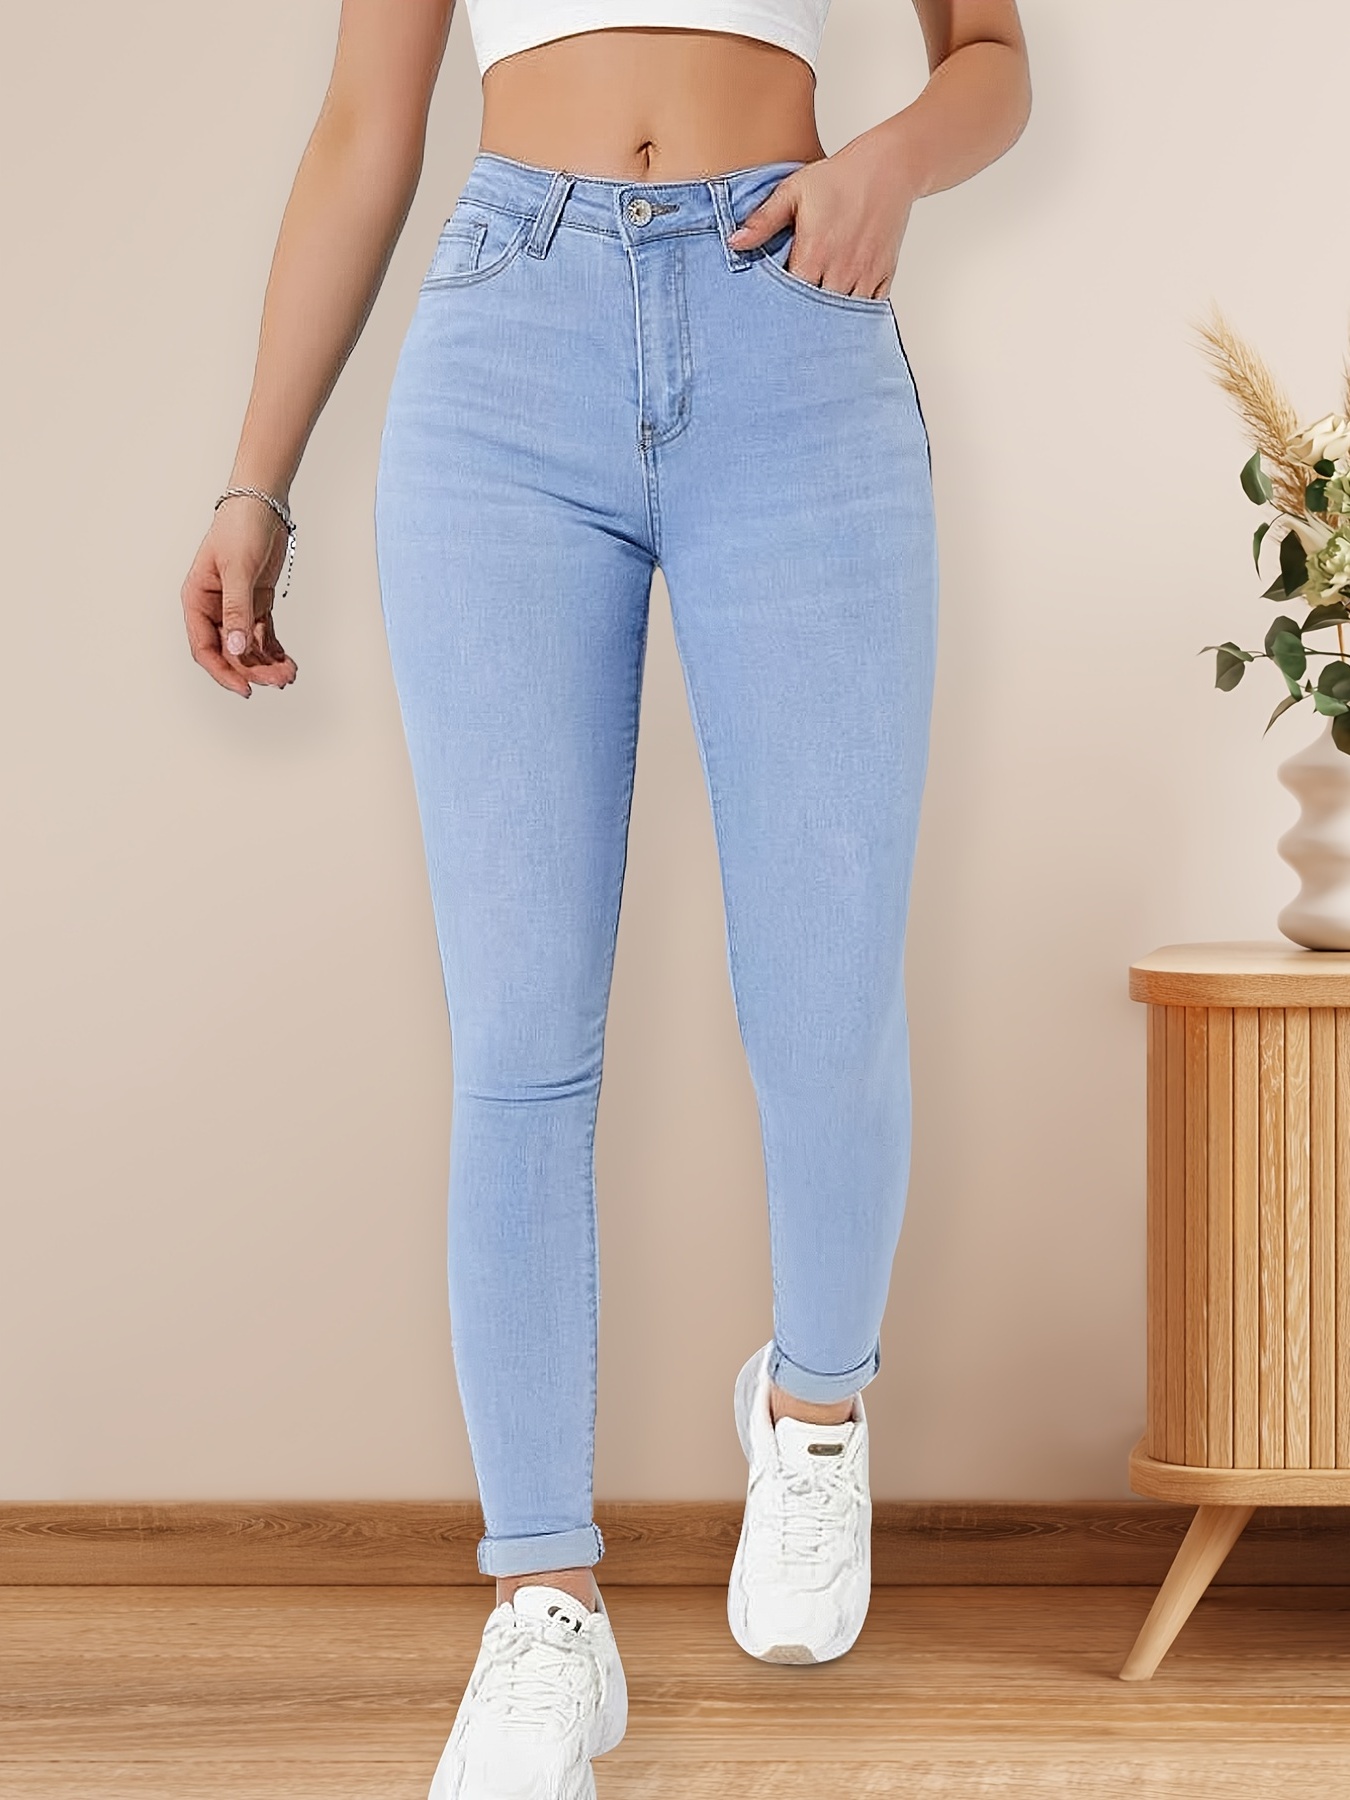 Skinny Fit High rise Jeans, Light Blue